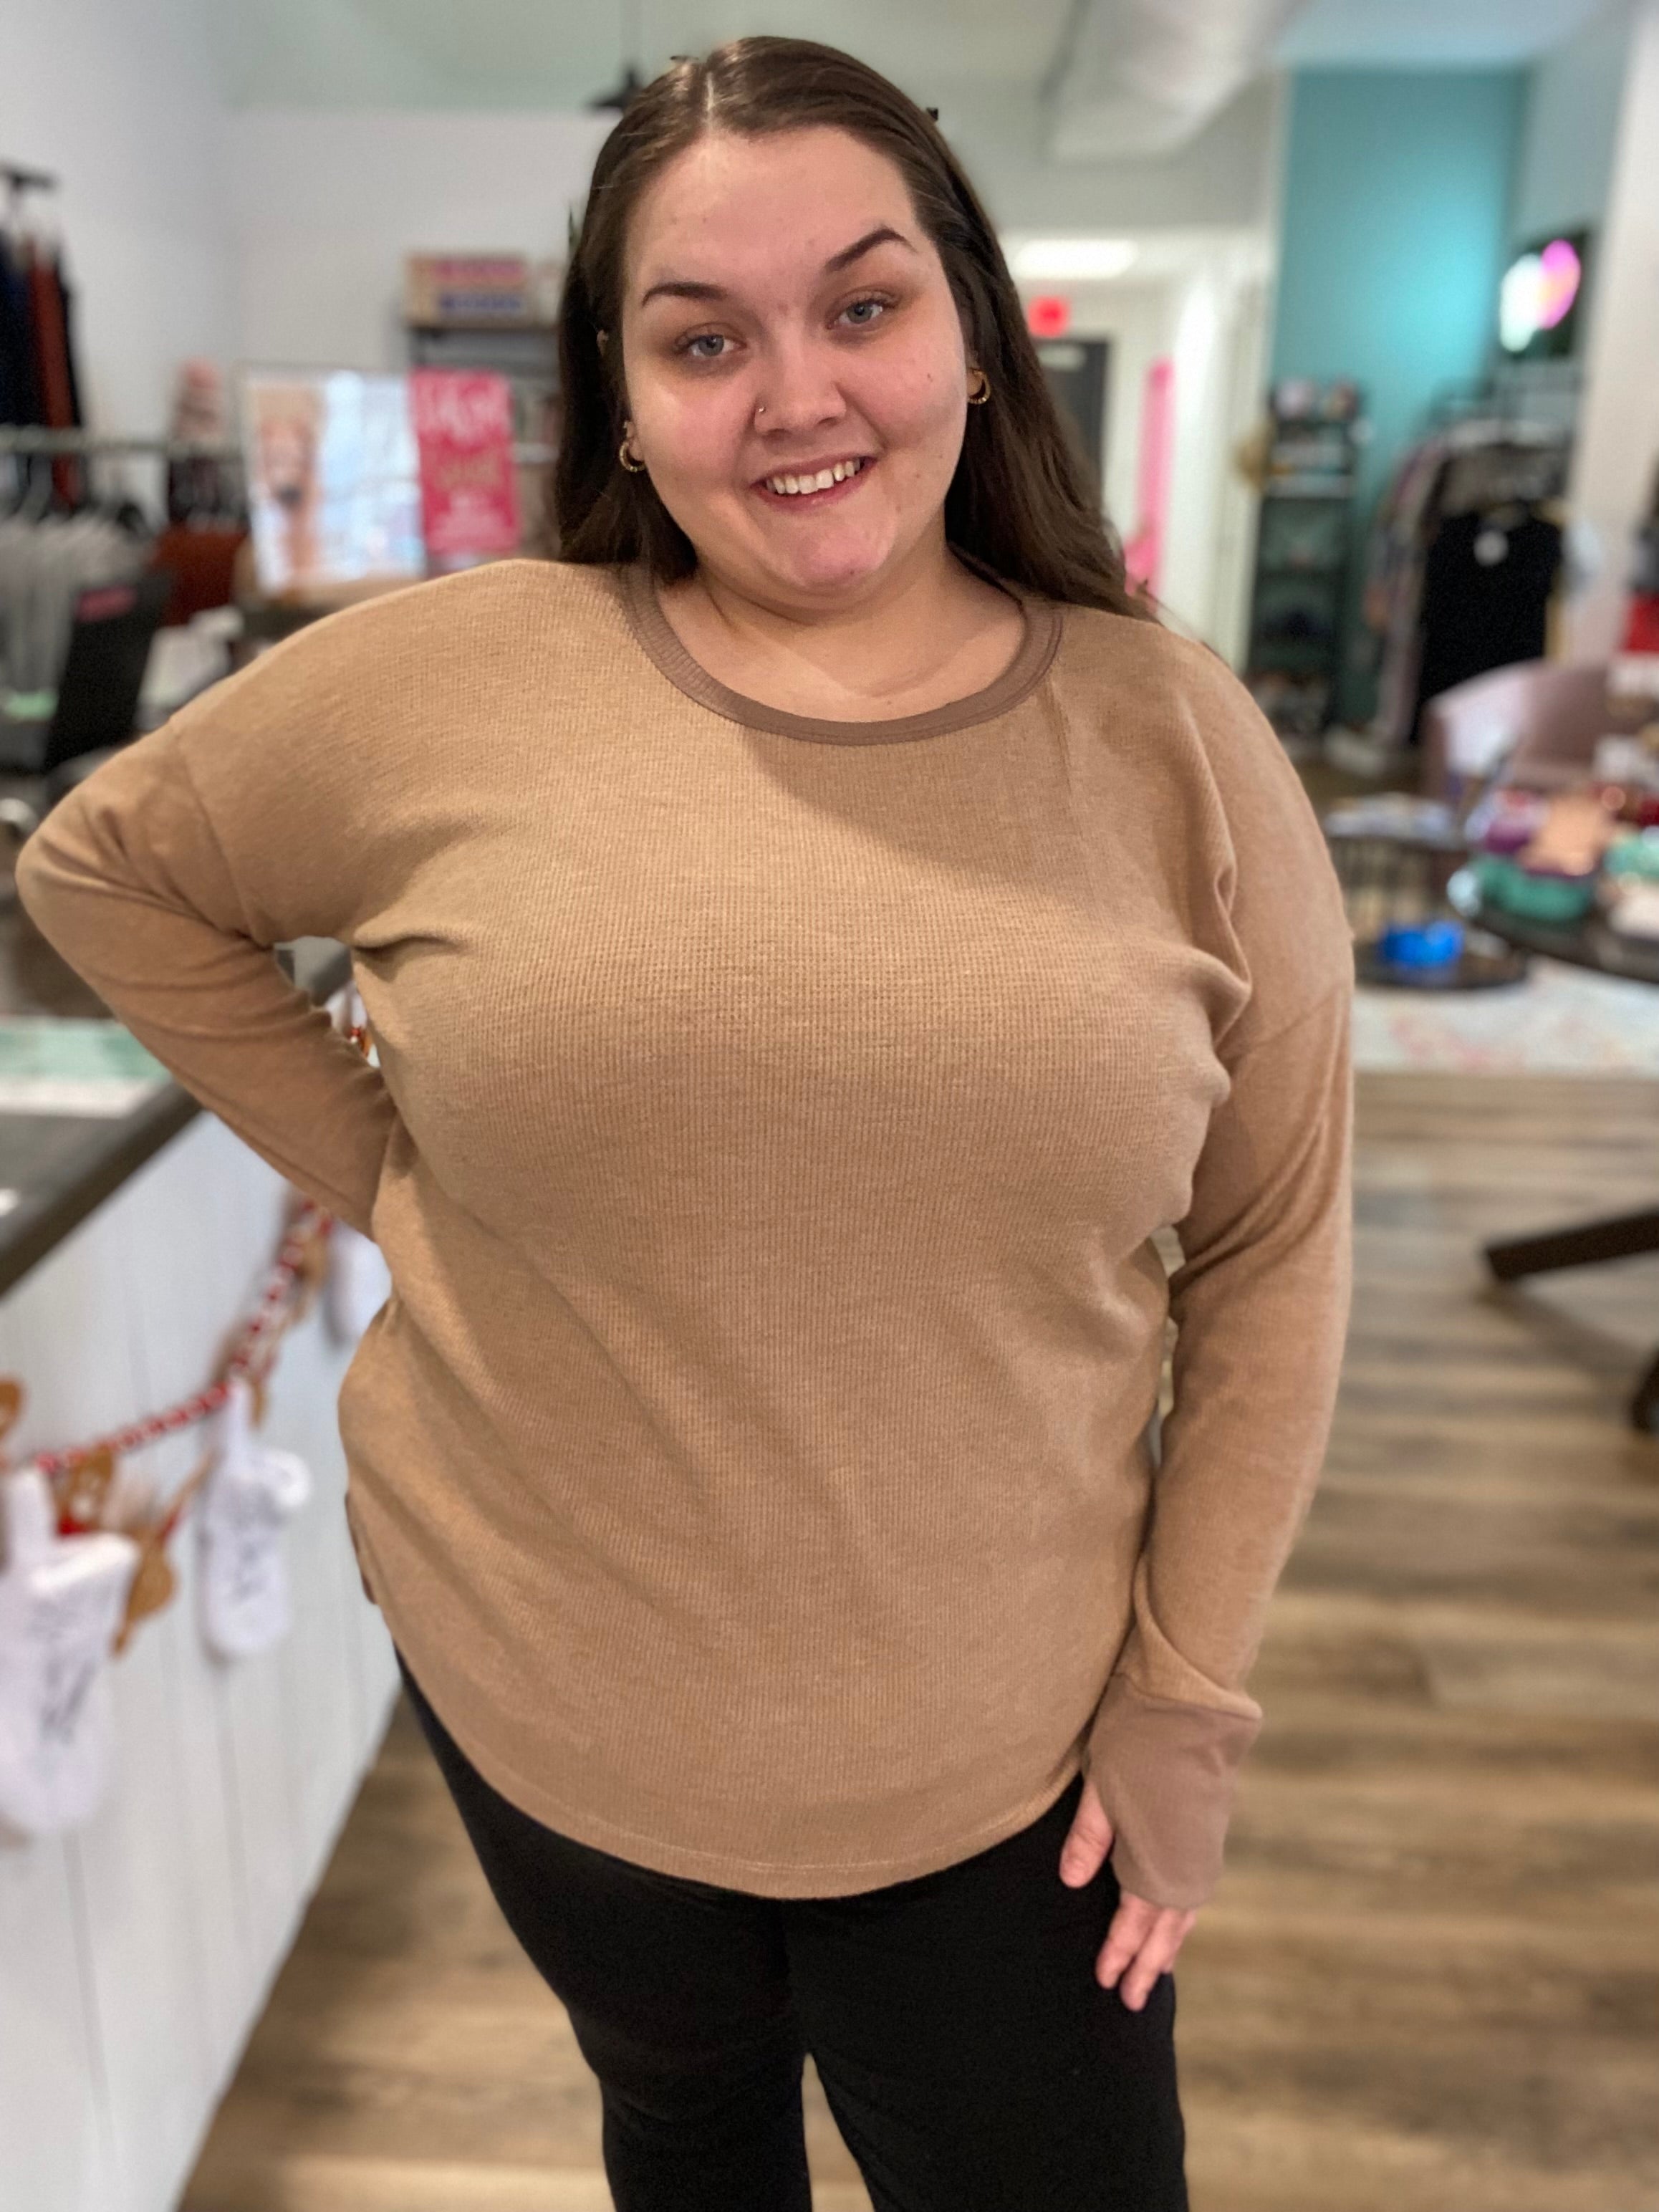 Shop Calli Thermal Top with Thumbholes-Shirts & Tops at Ruby Joy Boutique, a Women's Clothing Store in Pickerington, Ohio